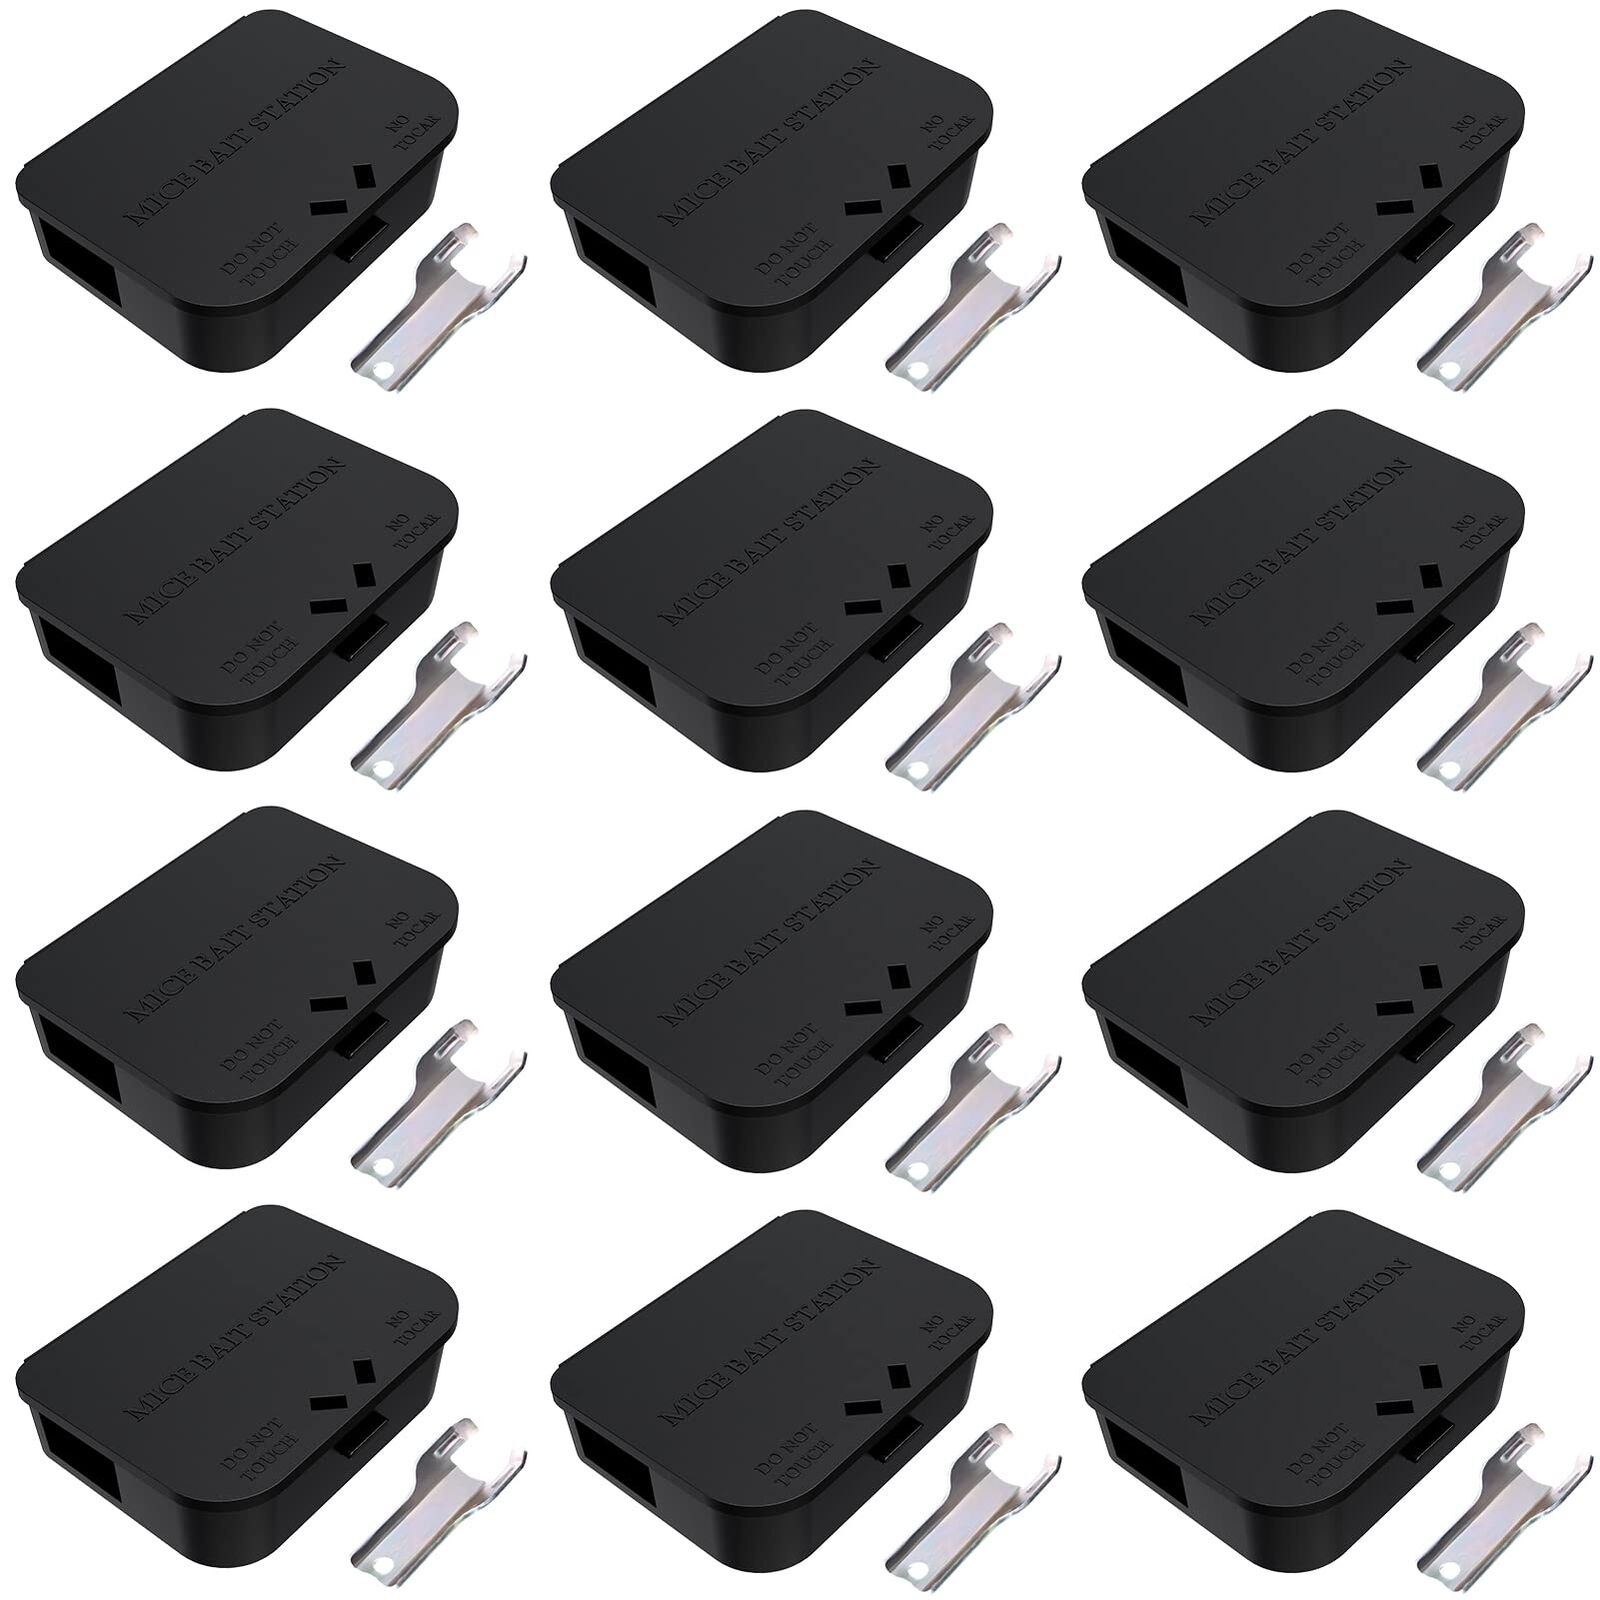 Mouse Stations With Keys 12 Pack Keyless Design And Key Required Mouse Stations 